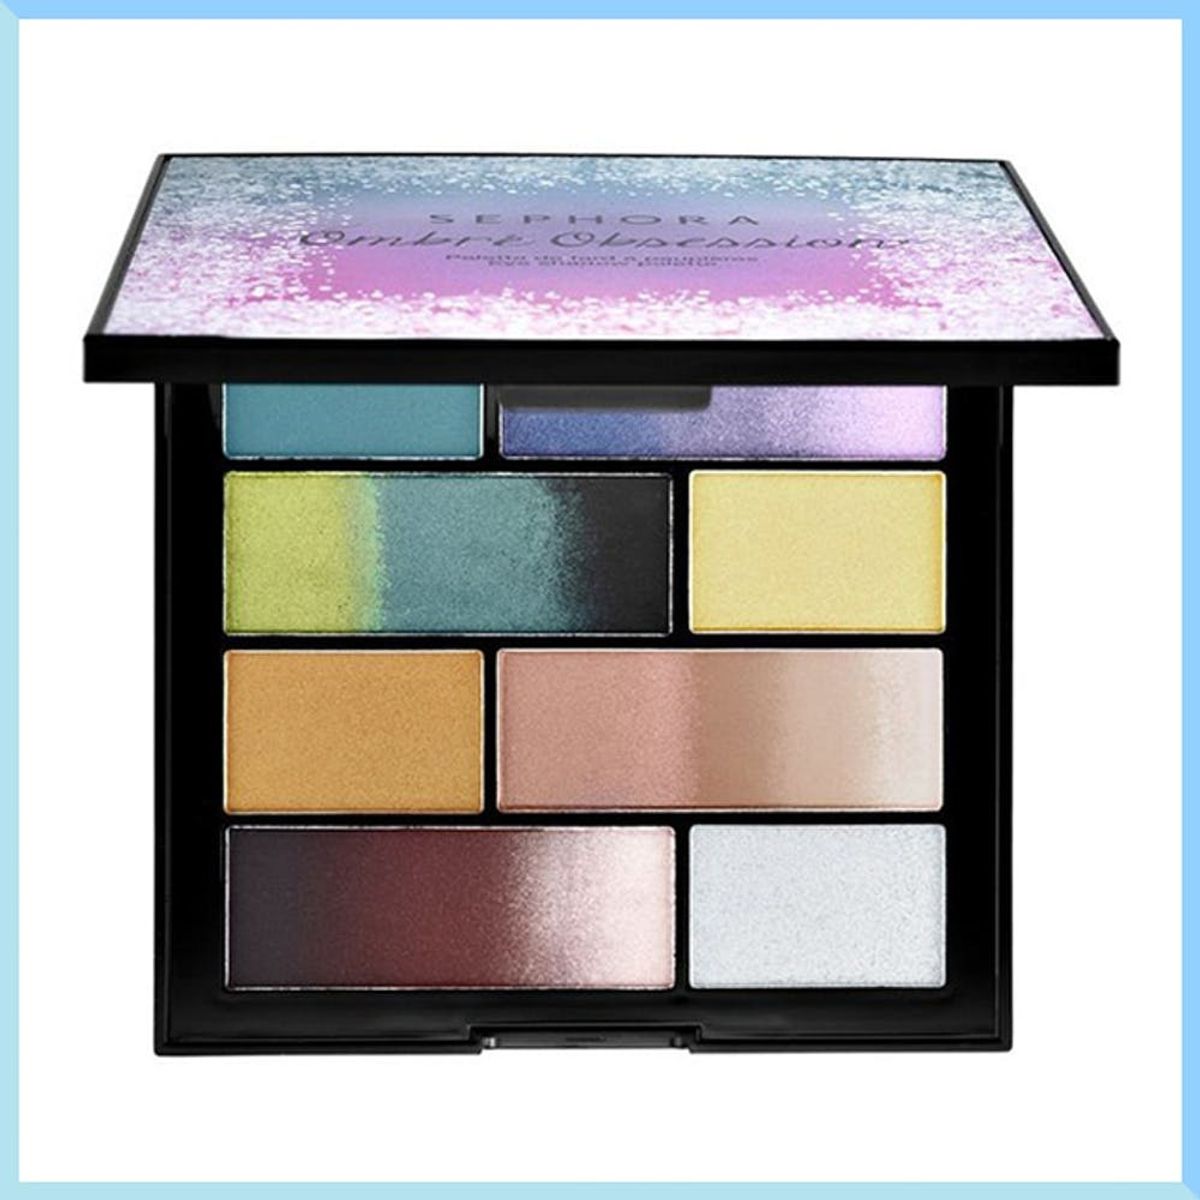 These 12 Ombré Makeup Palettes Are the Prettiest Ones Out There